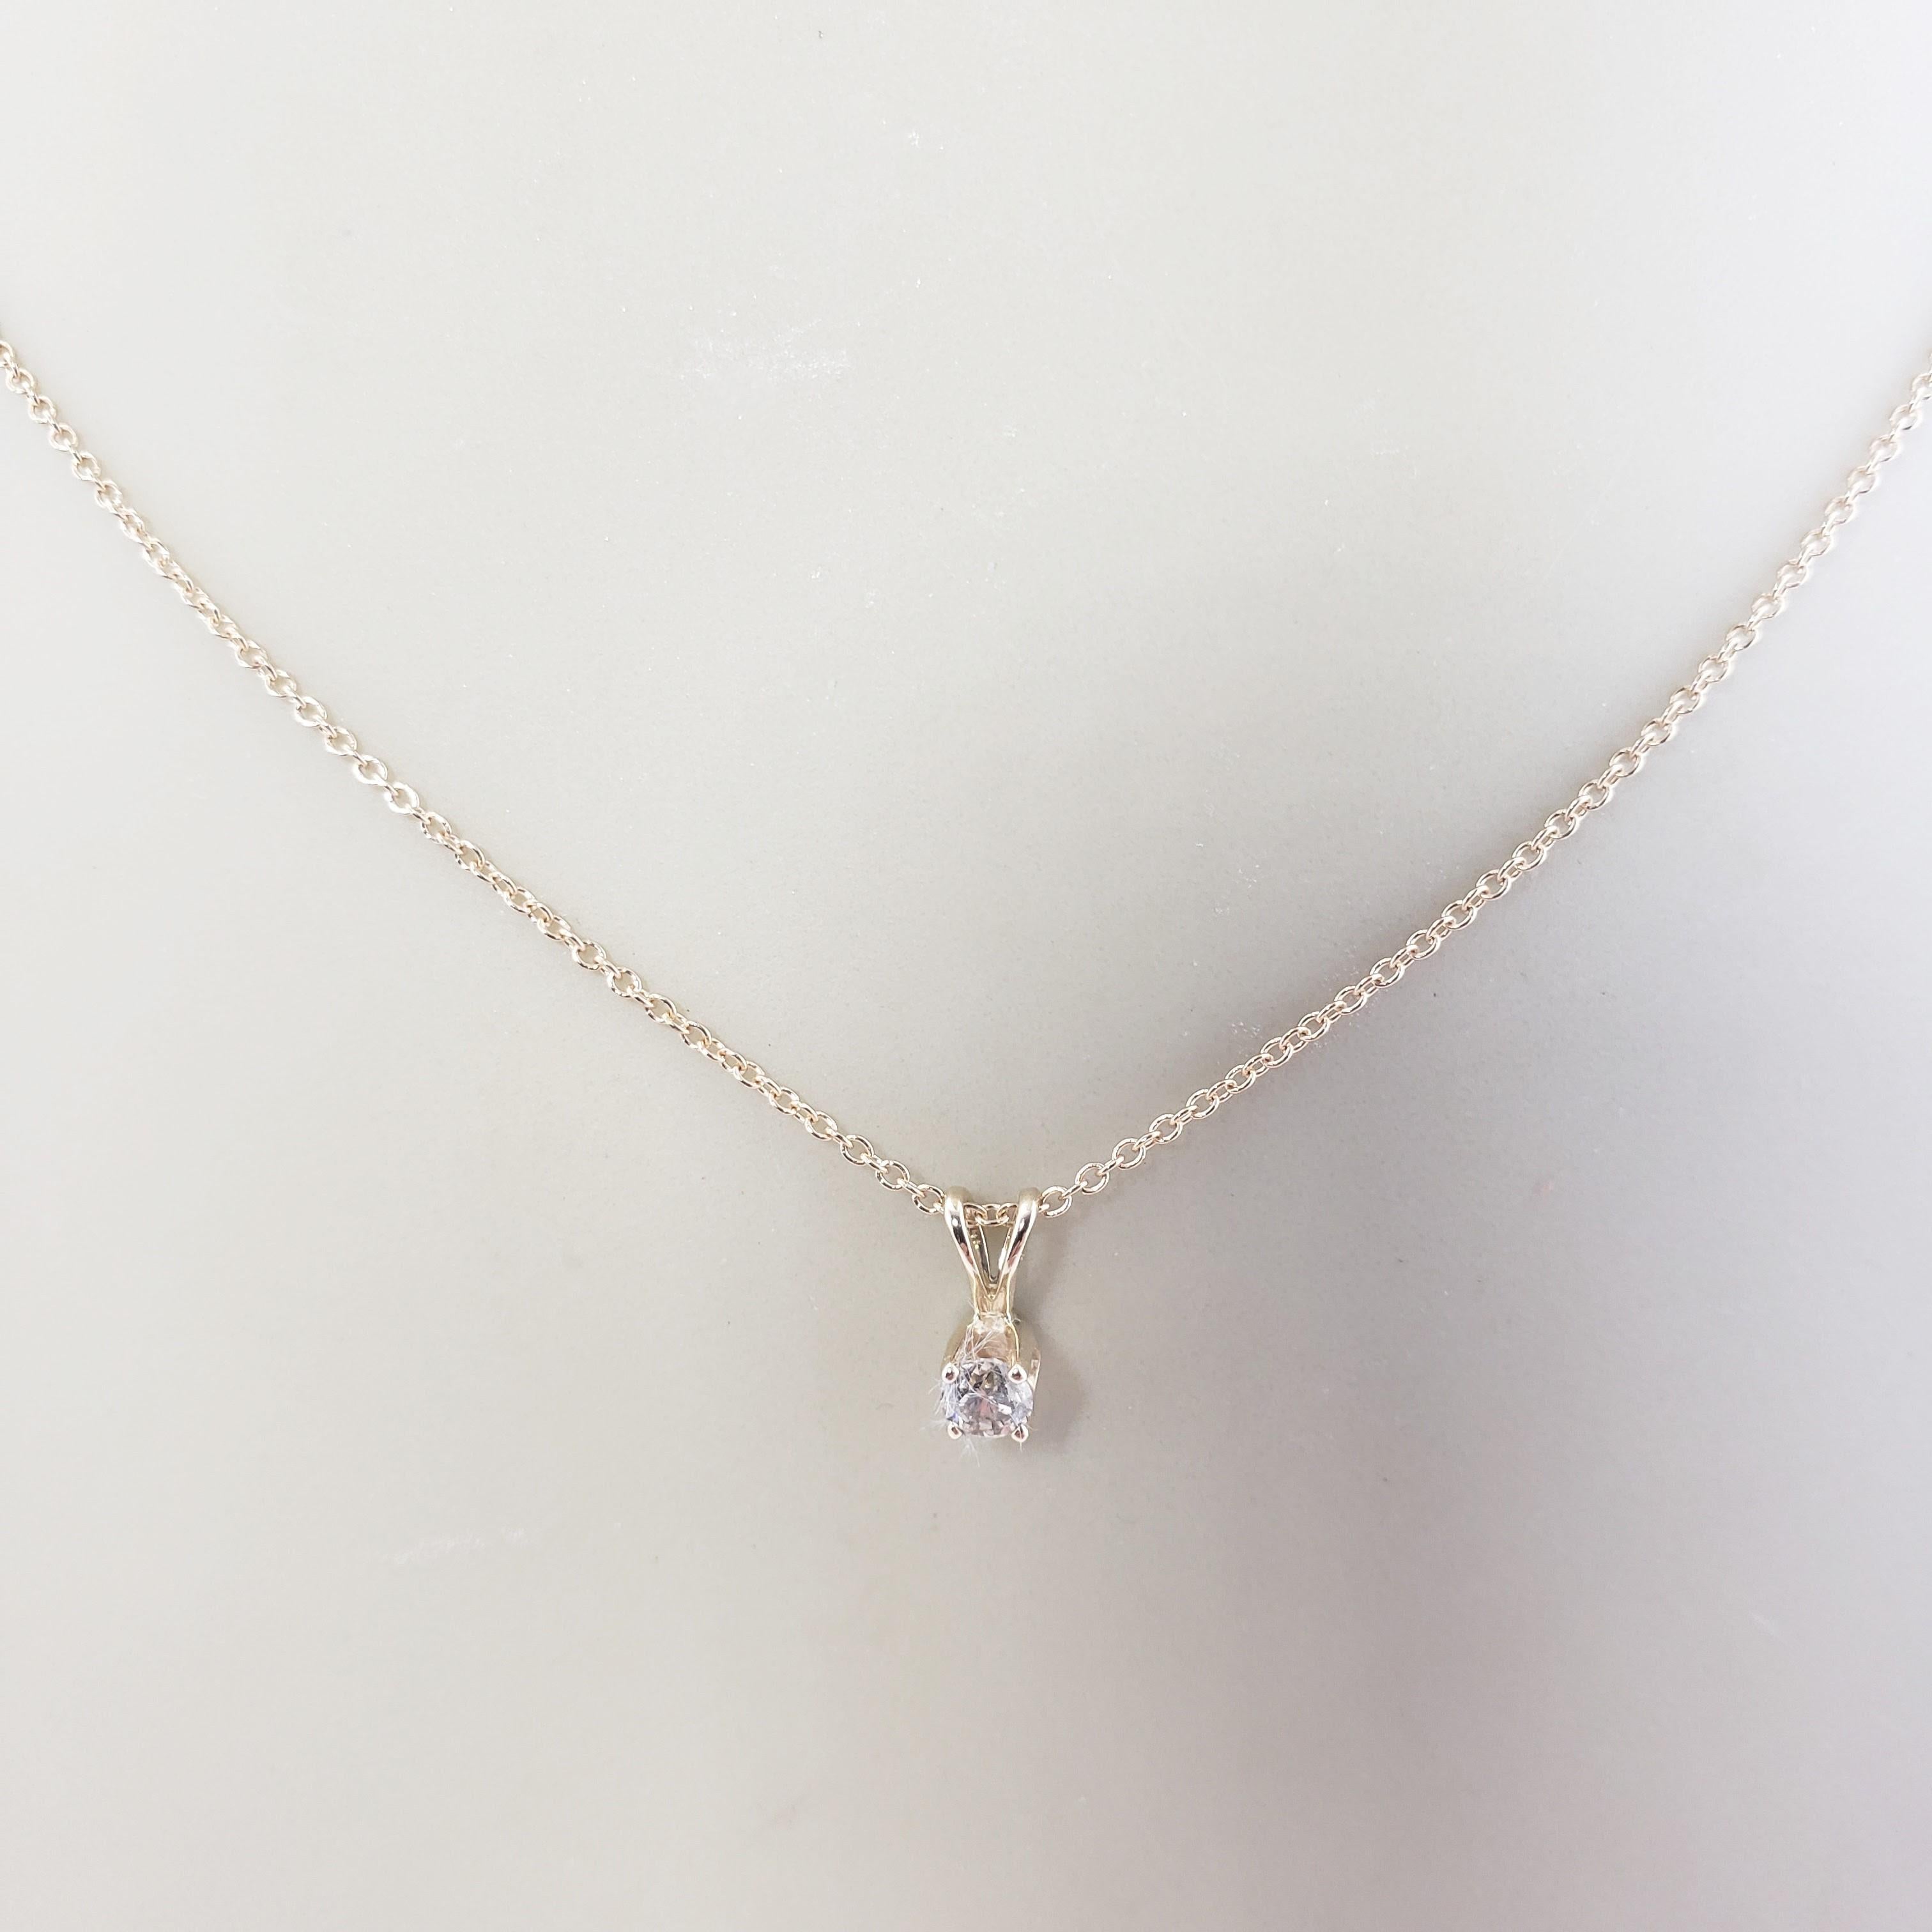 14 Karat Yellow Gold and Diamond Pendant Necklace For Sale 2